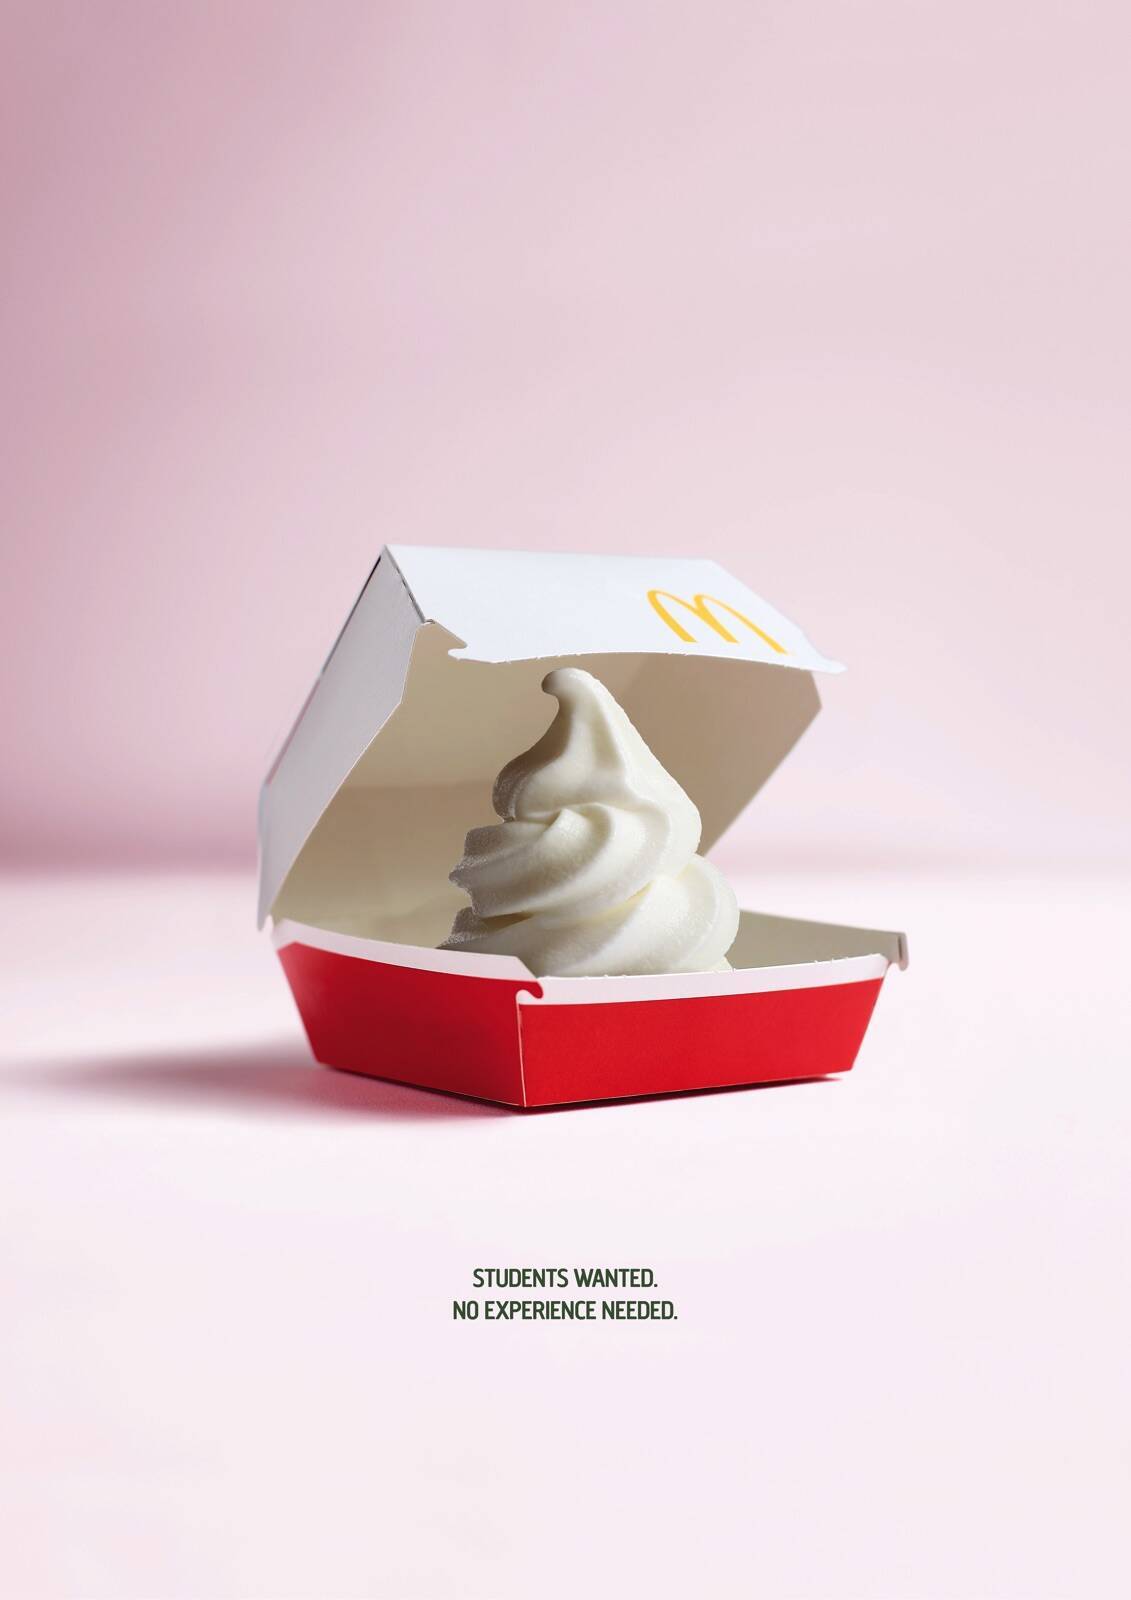 McMistakes AD